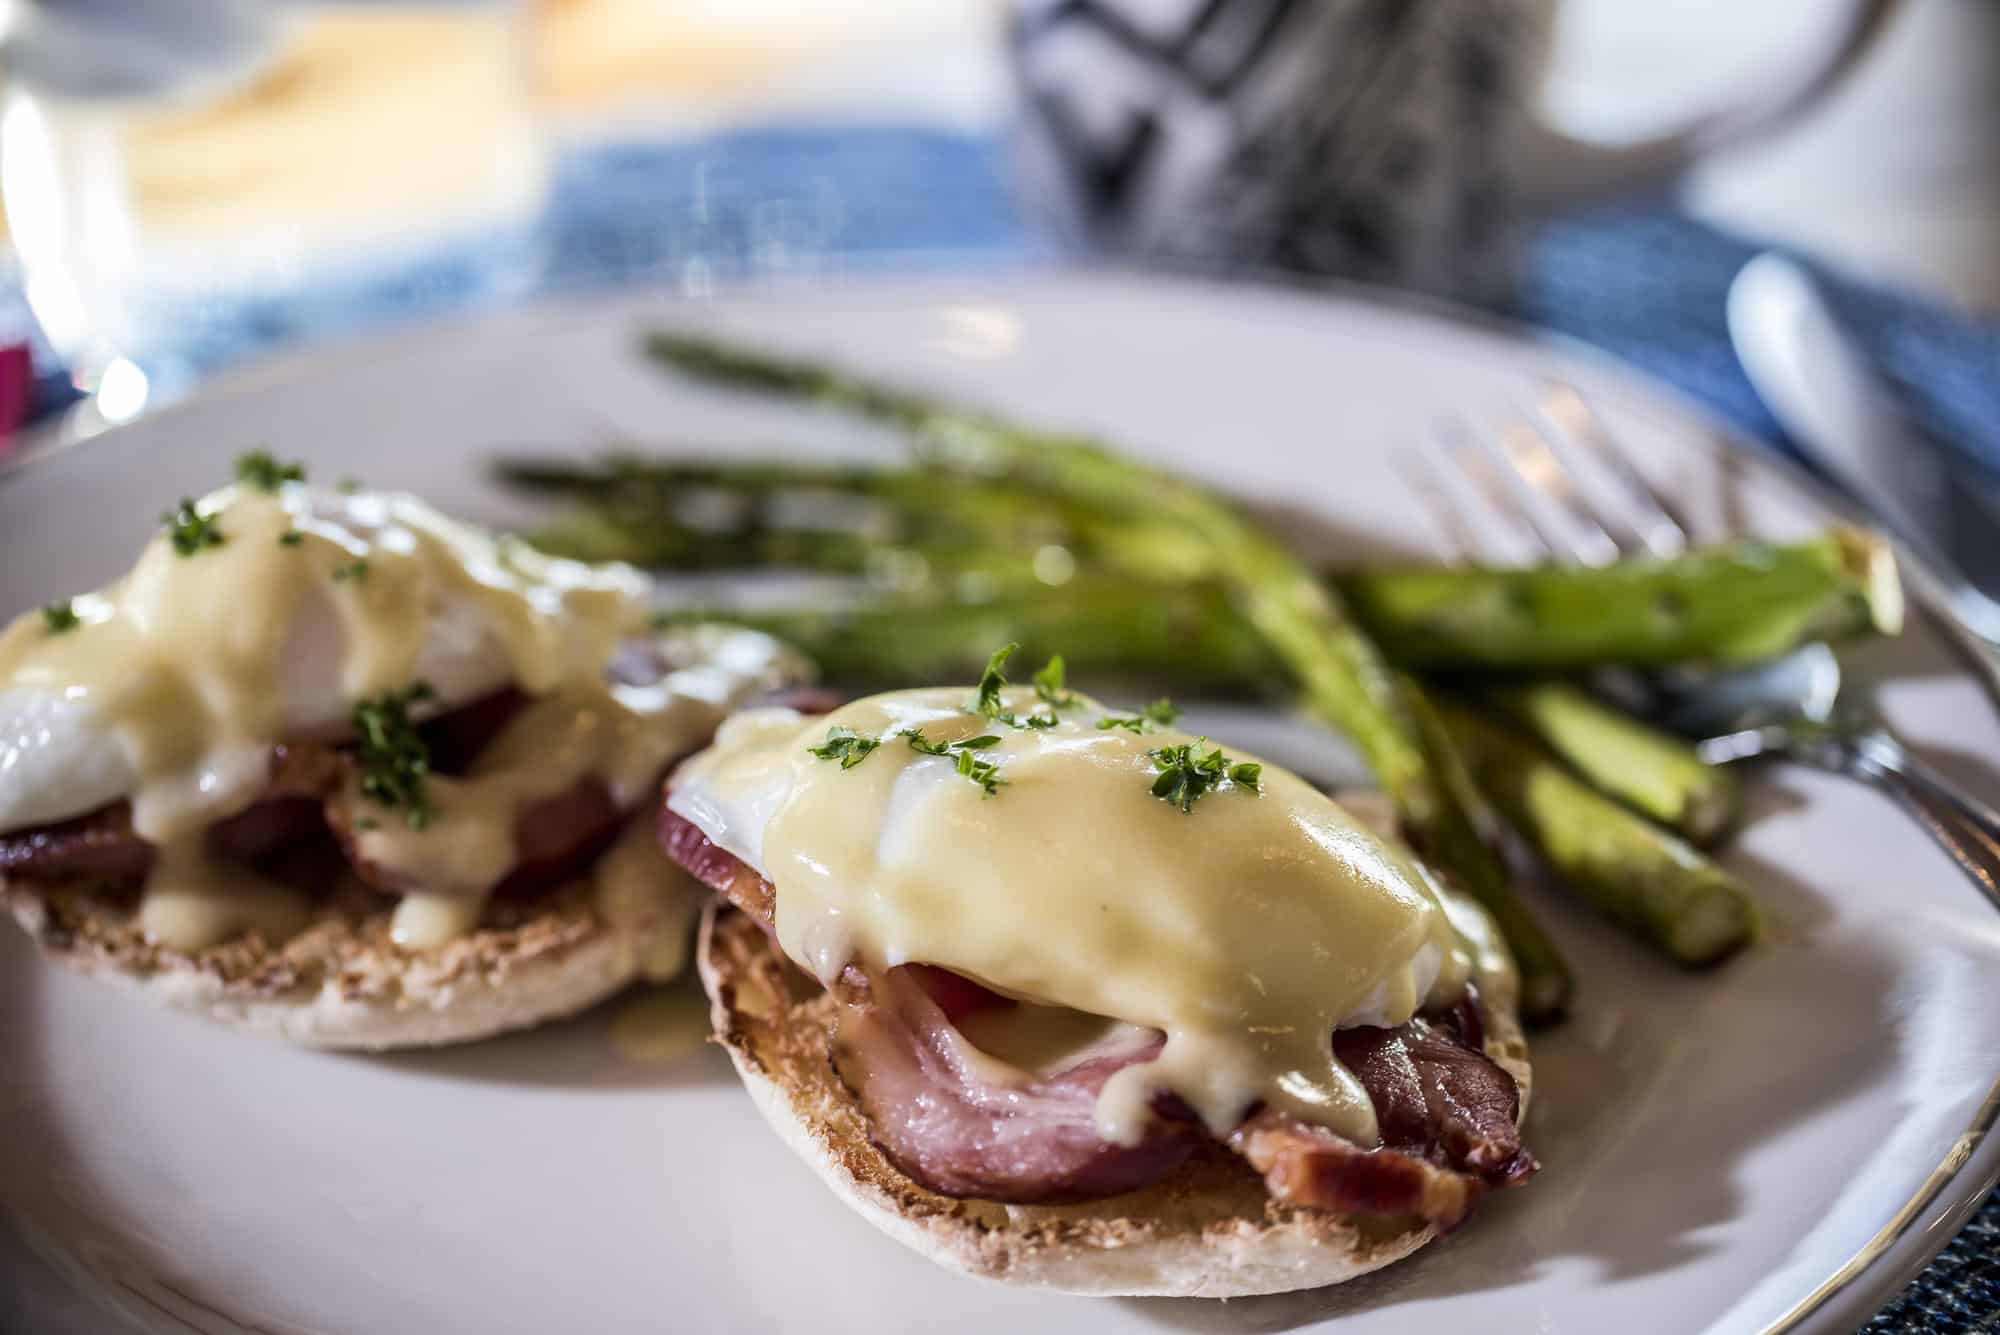 Willamette Valley Inn eggs Benedict with asparagus 